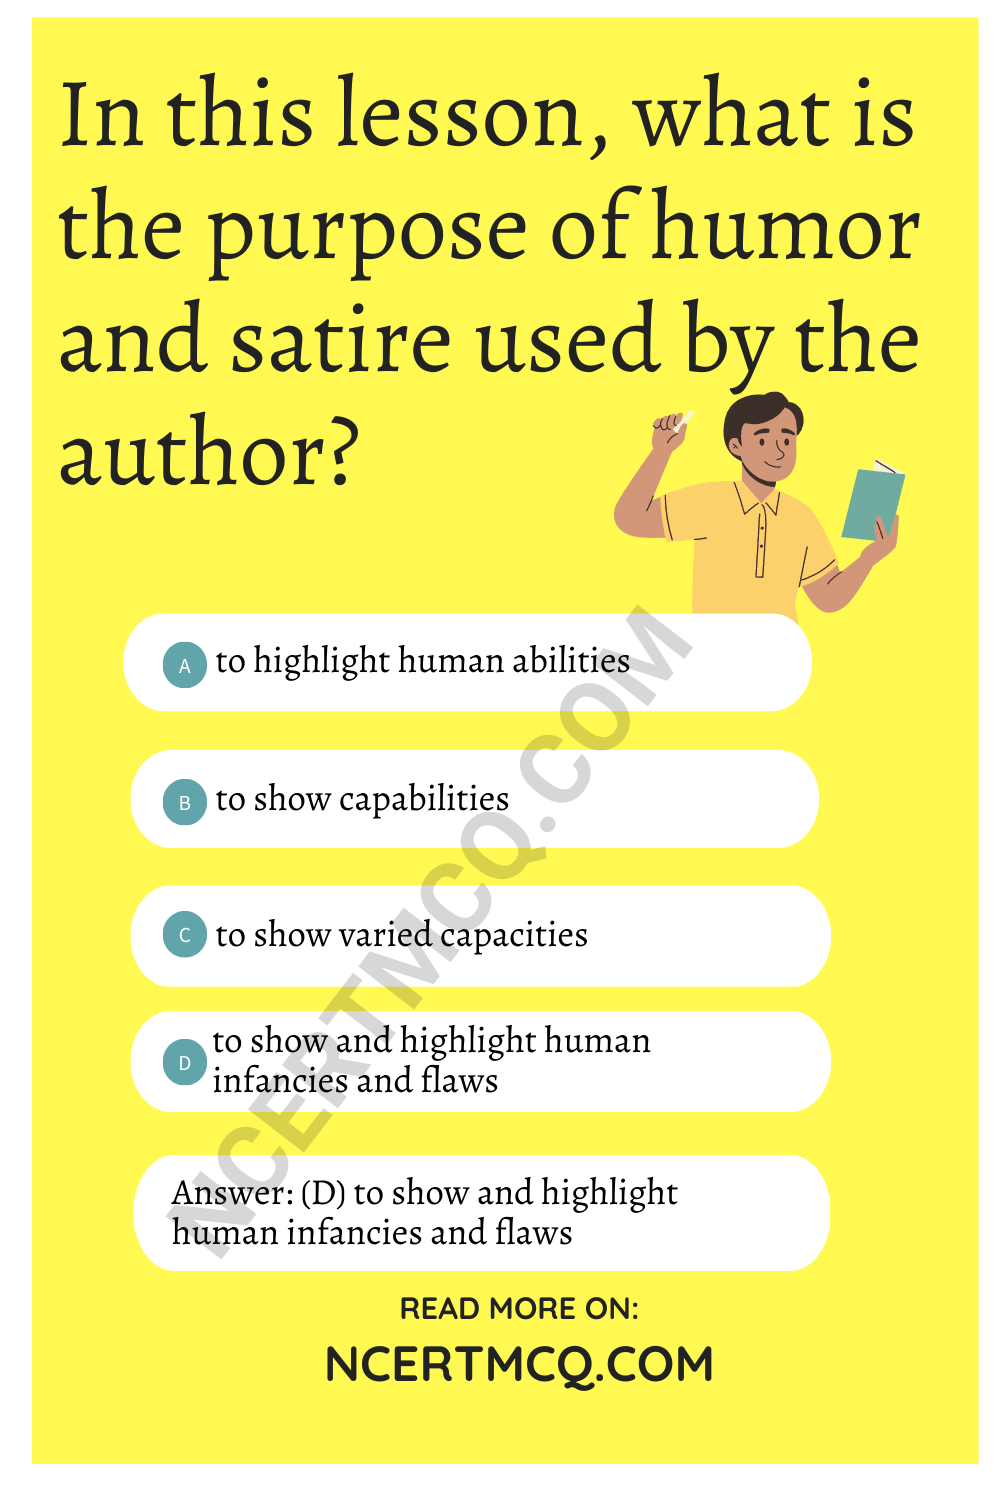 In this lesson, what is the purpose of humor and satire used by the author?